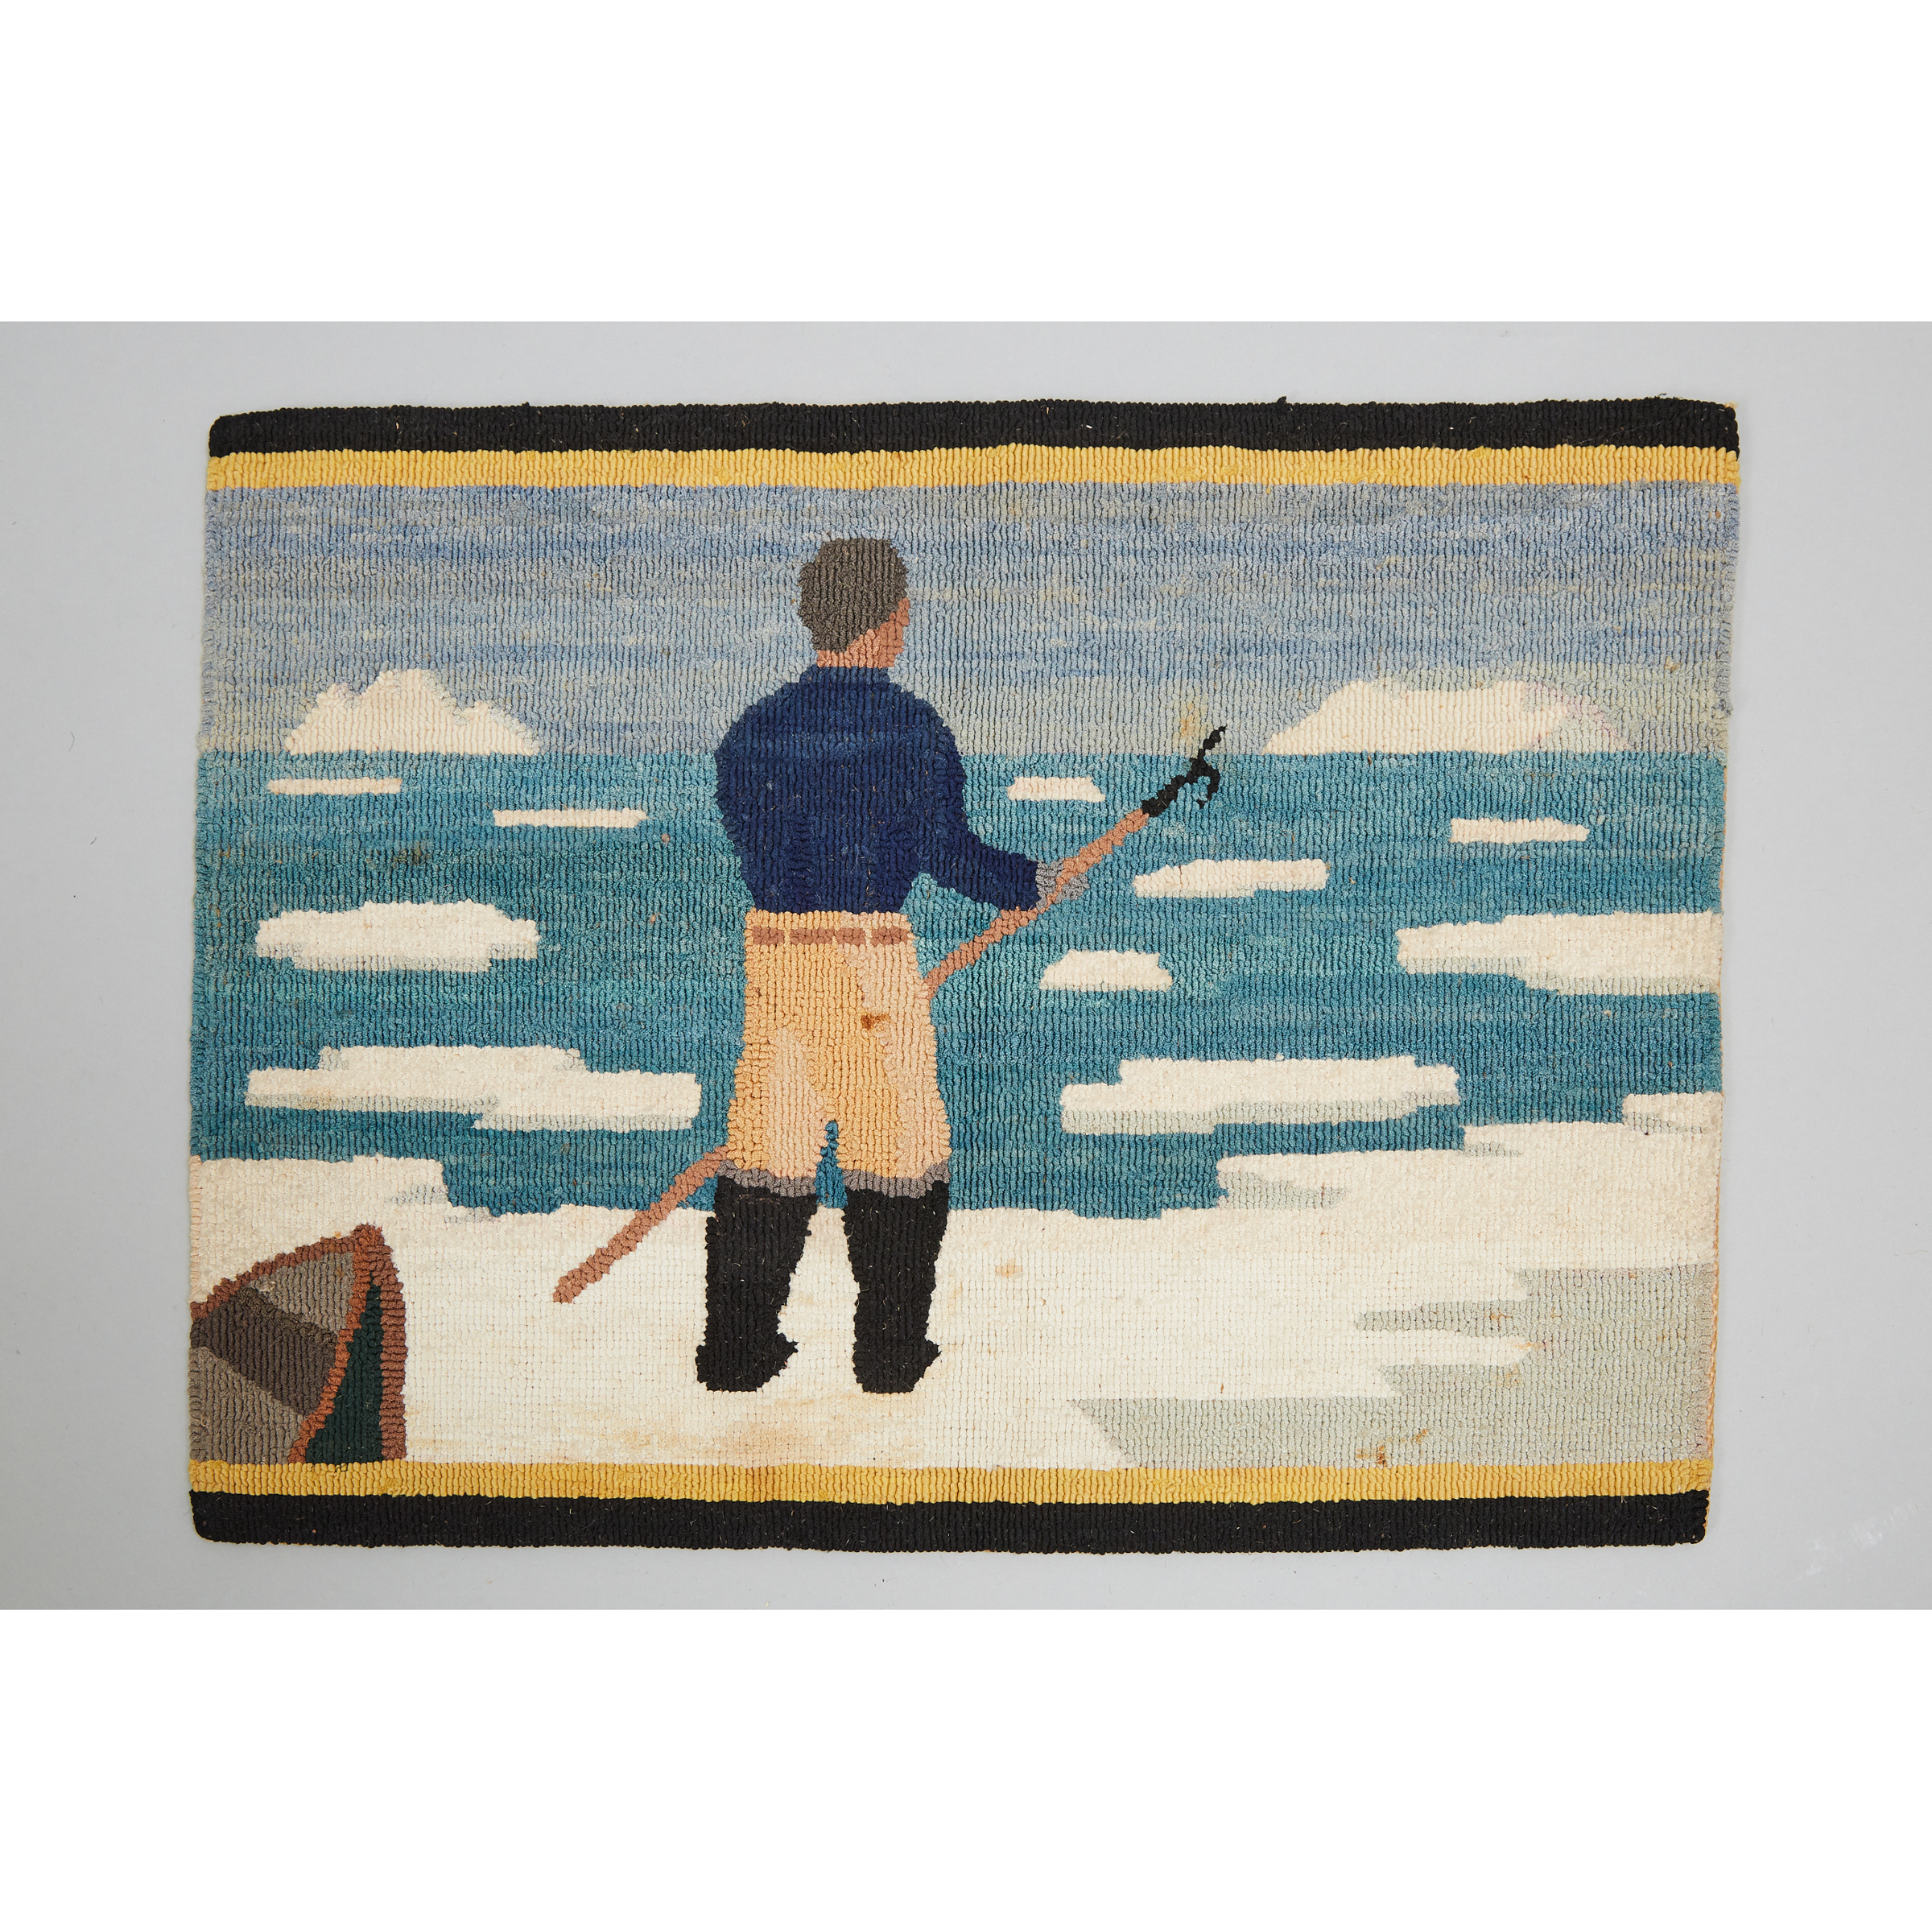 Grenfell Labrador Industries 'Hunter with Harpoon, Boat and Ice Flow' Hooked Mat, c.1930